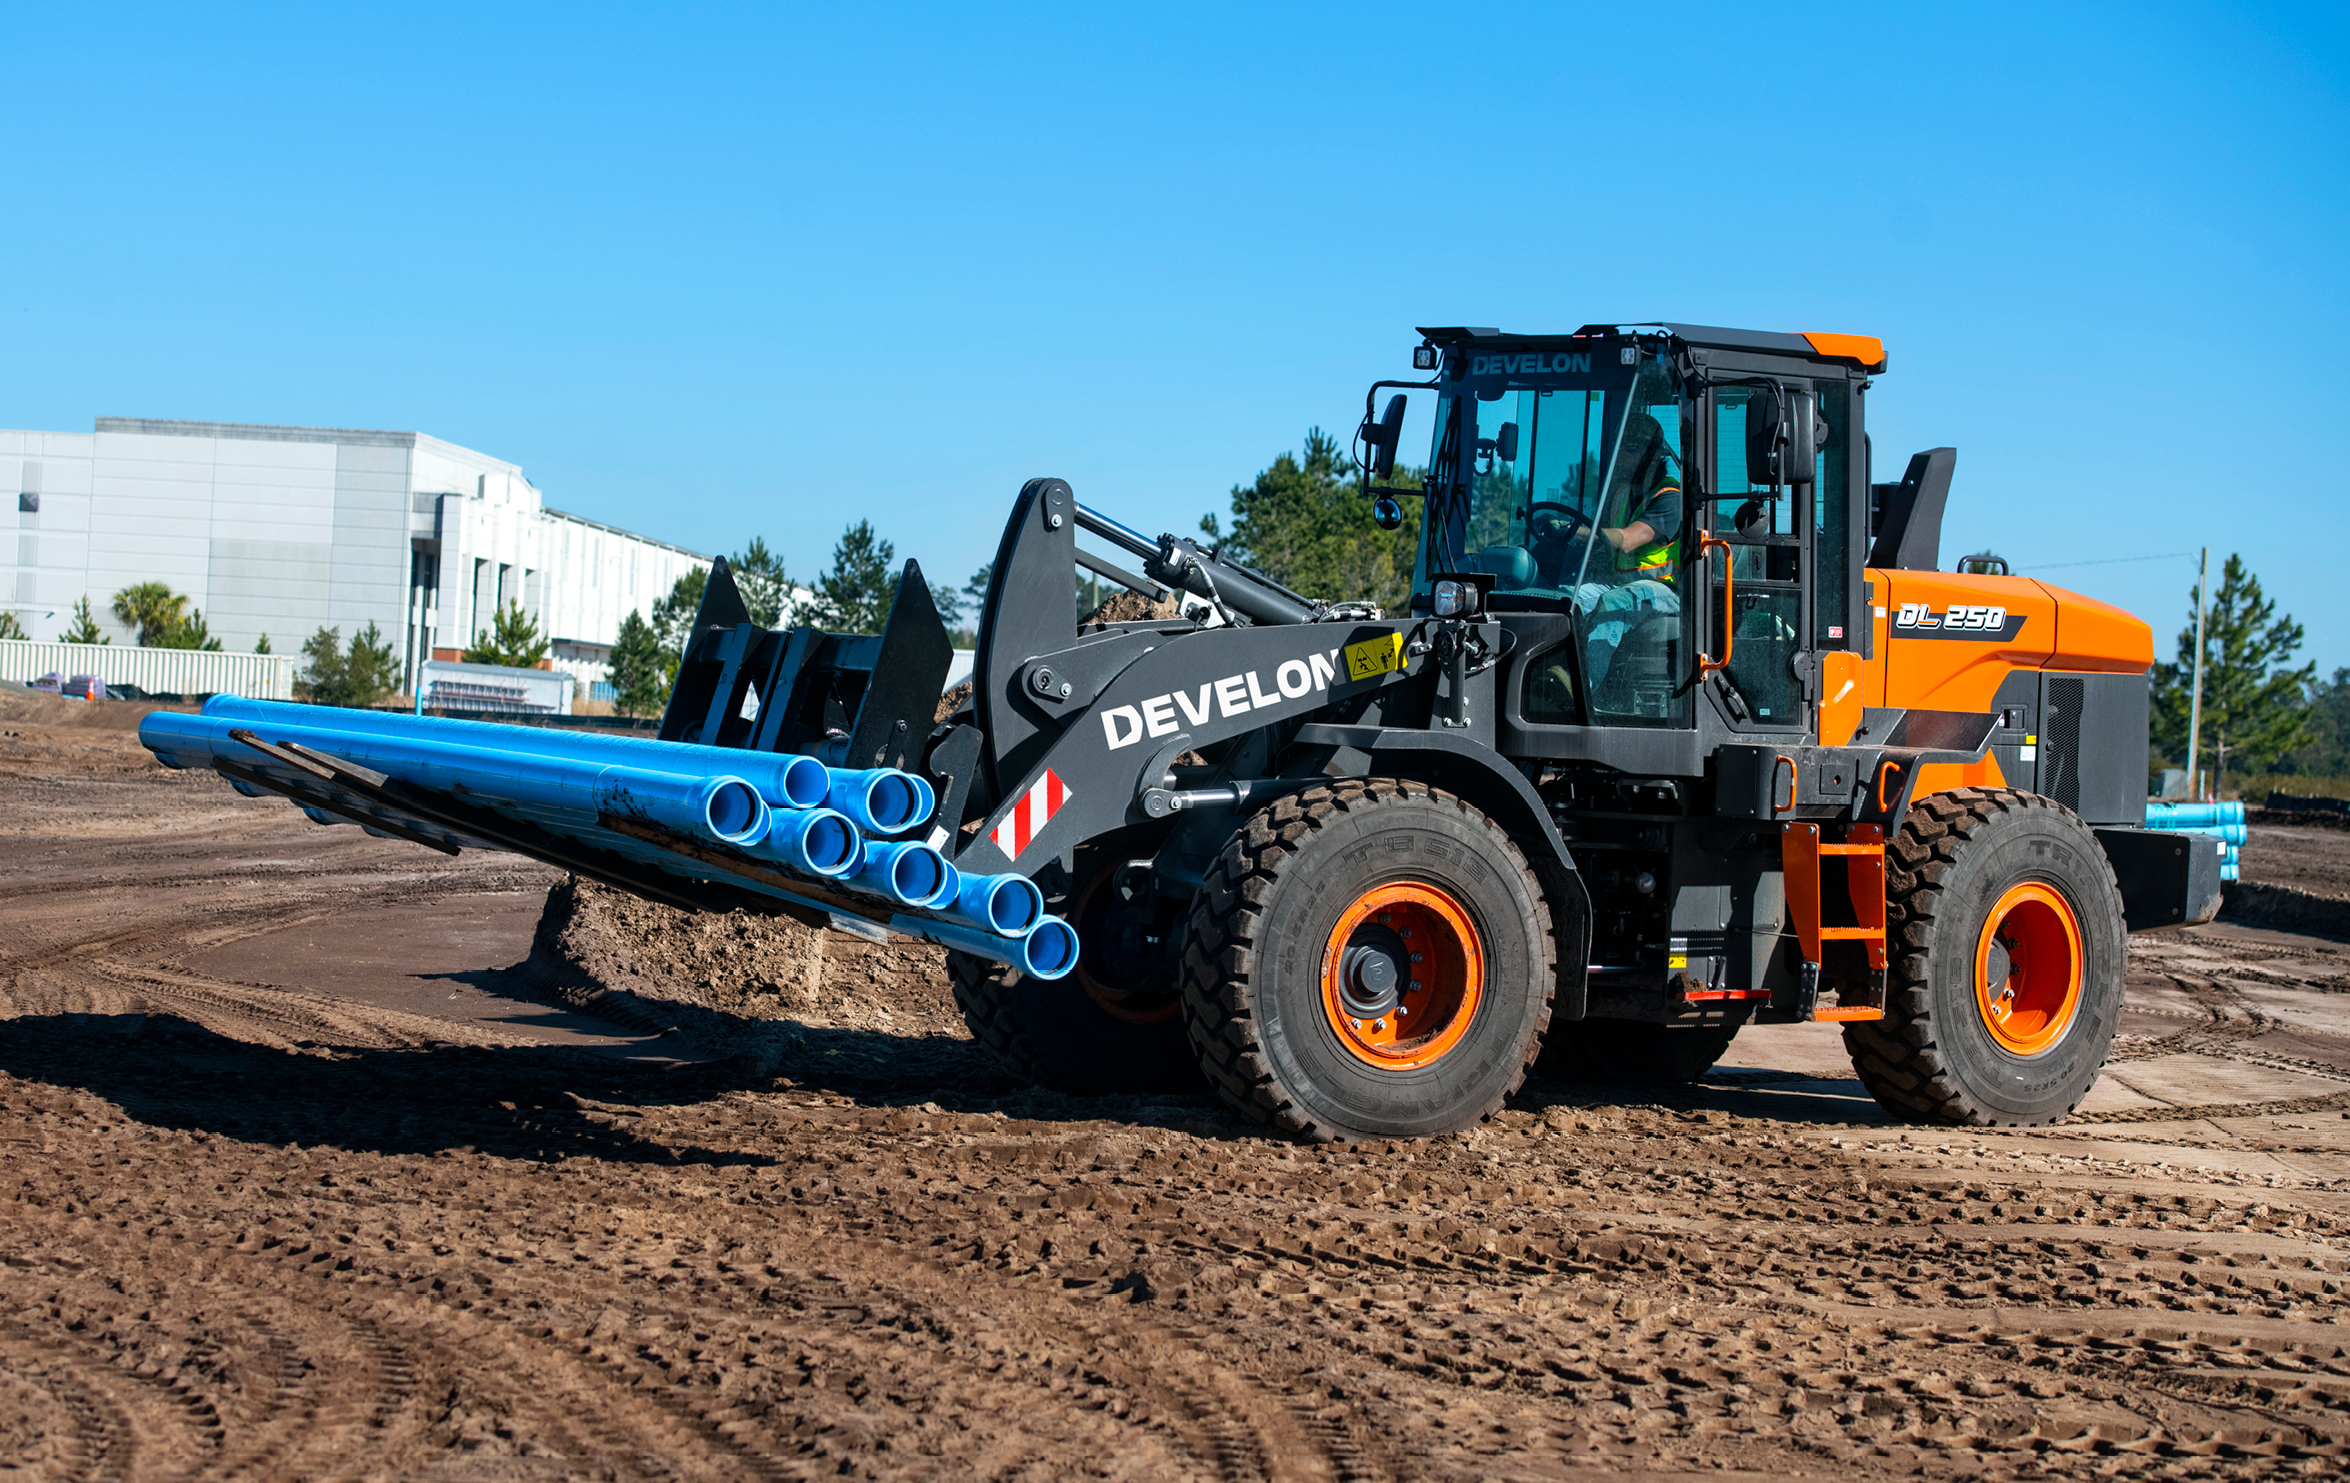 The DEVELON DL250-7 wheel loader hauling a load on a job site.